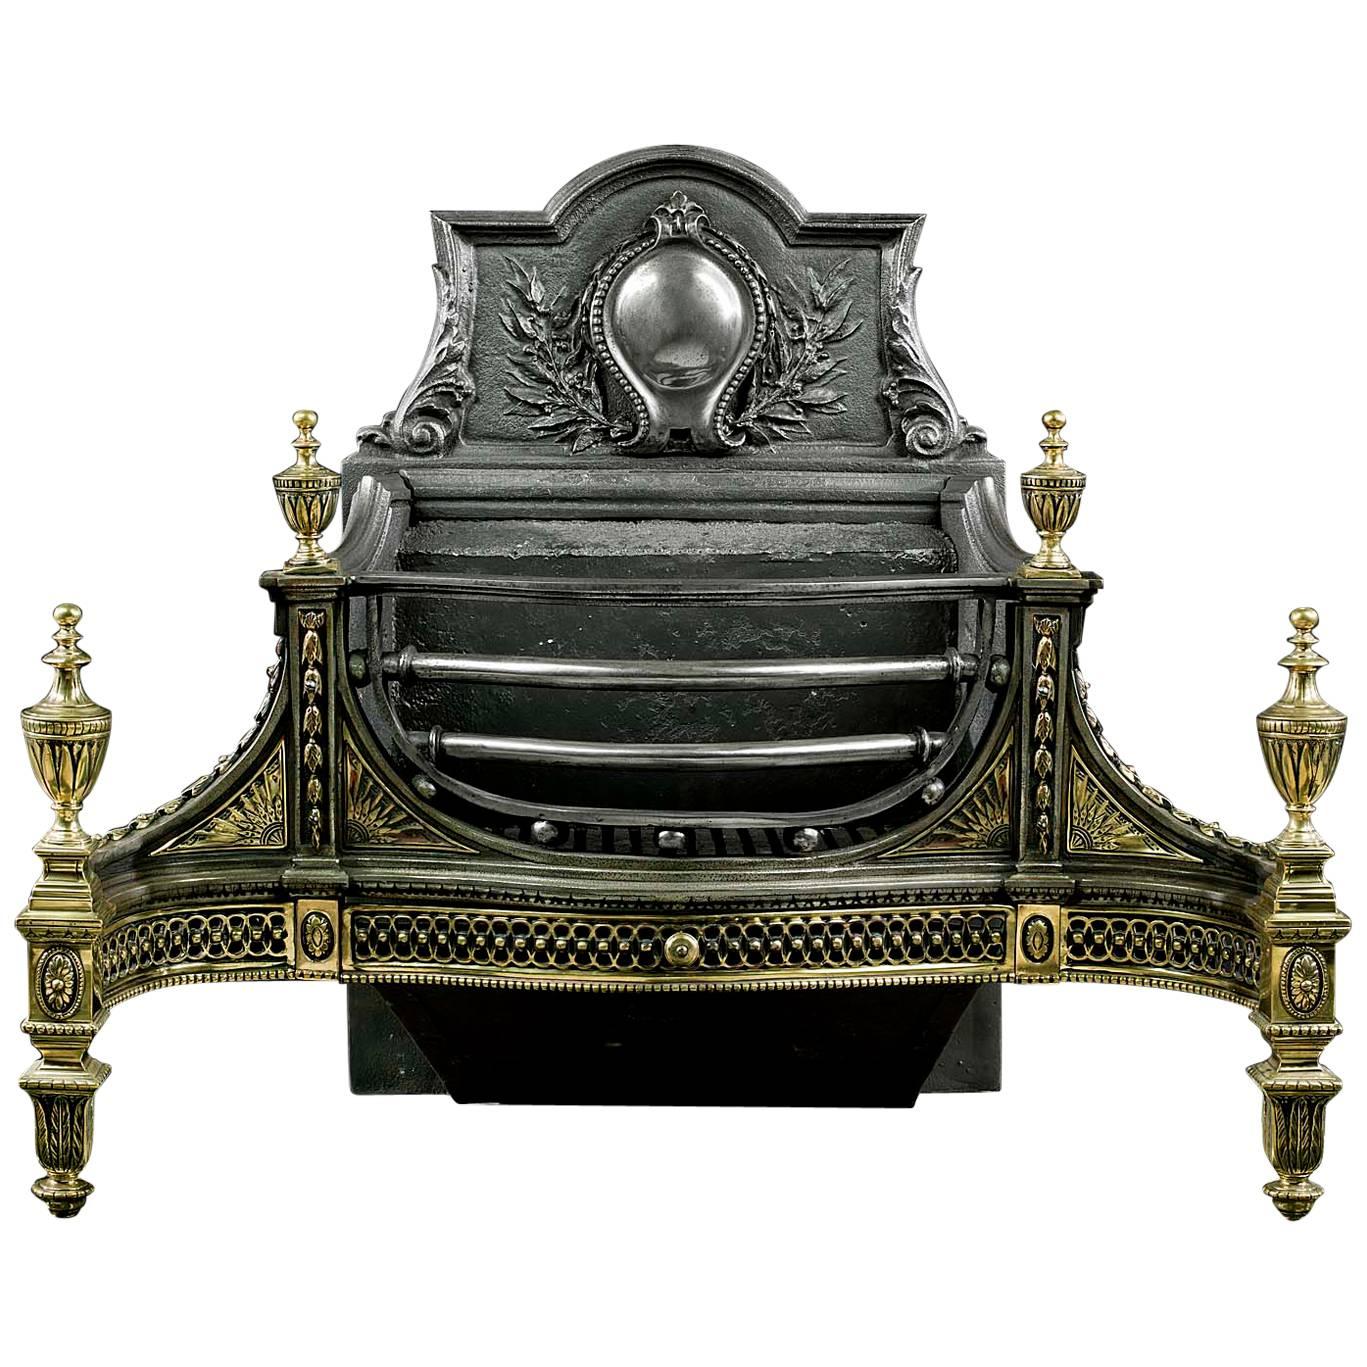 19th Century Neoclassical English Fire Grate in Manner of Robert Adam